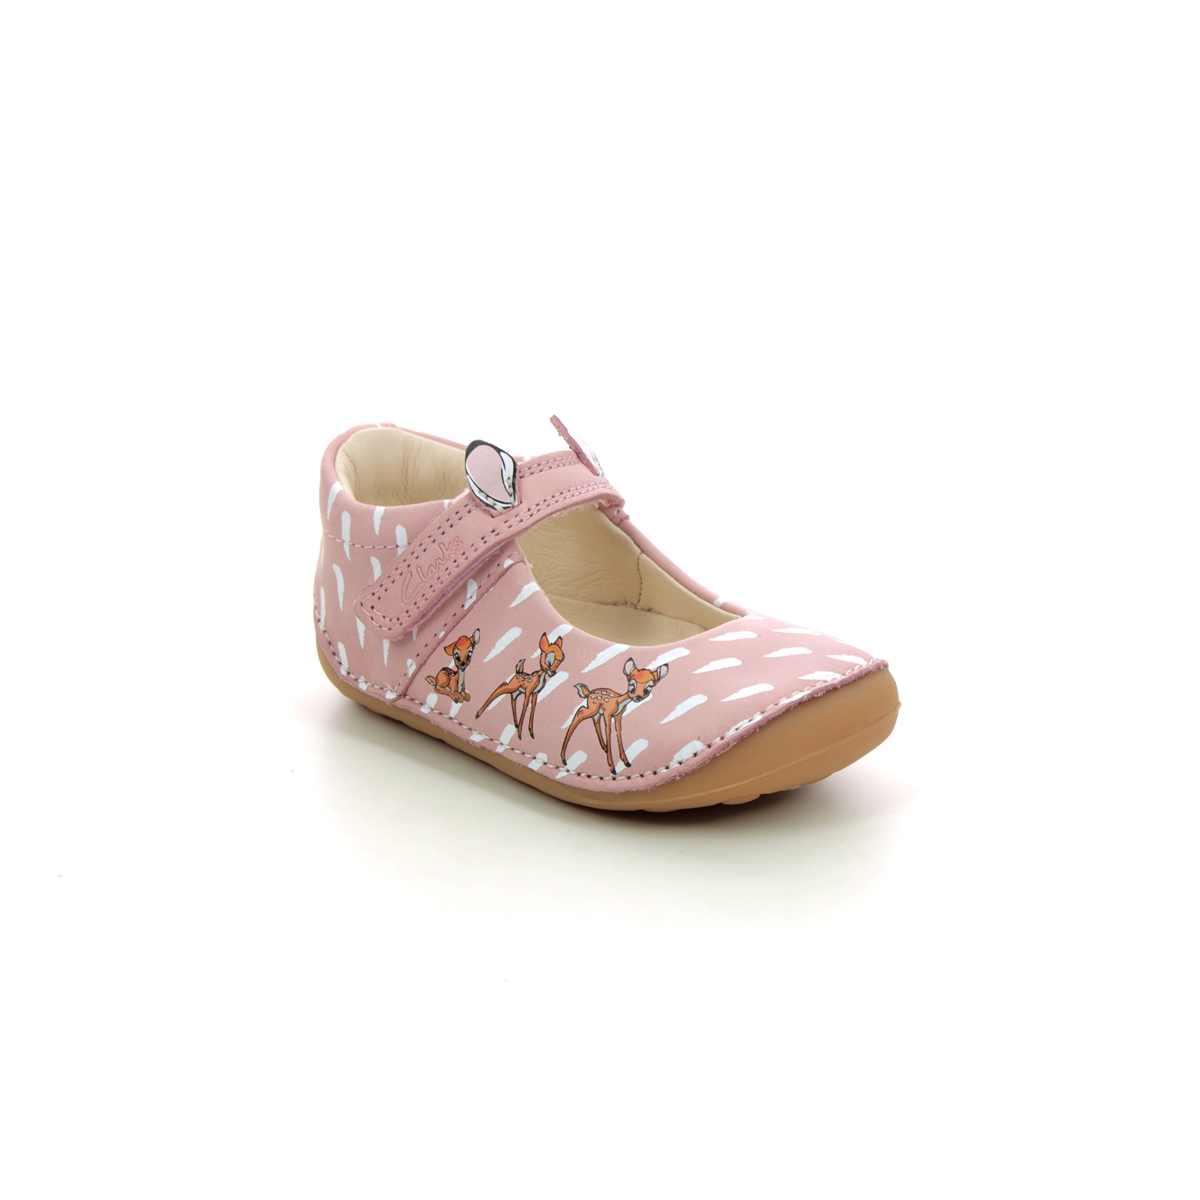 Clarks Tiny Deer T Pink Leather Kids girls first and baby shoes 6142-17G in a Plain Leather in Size 4.5